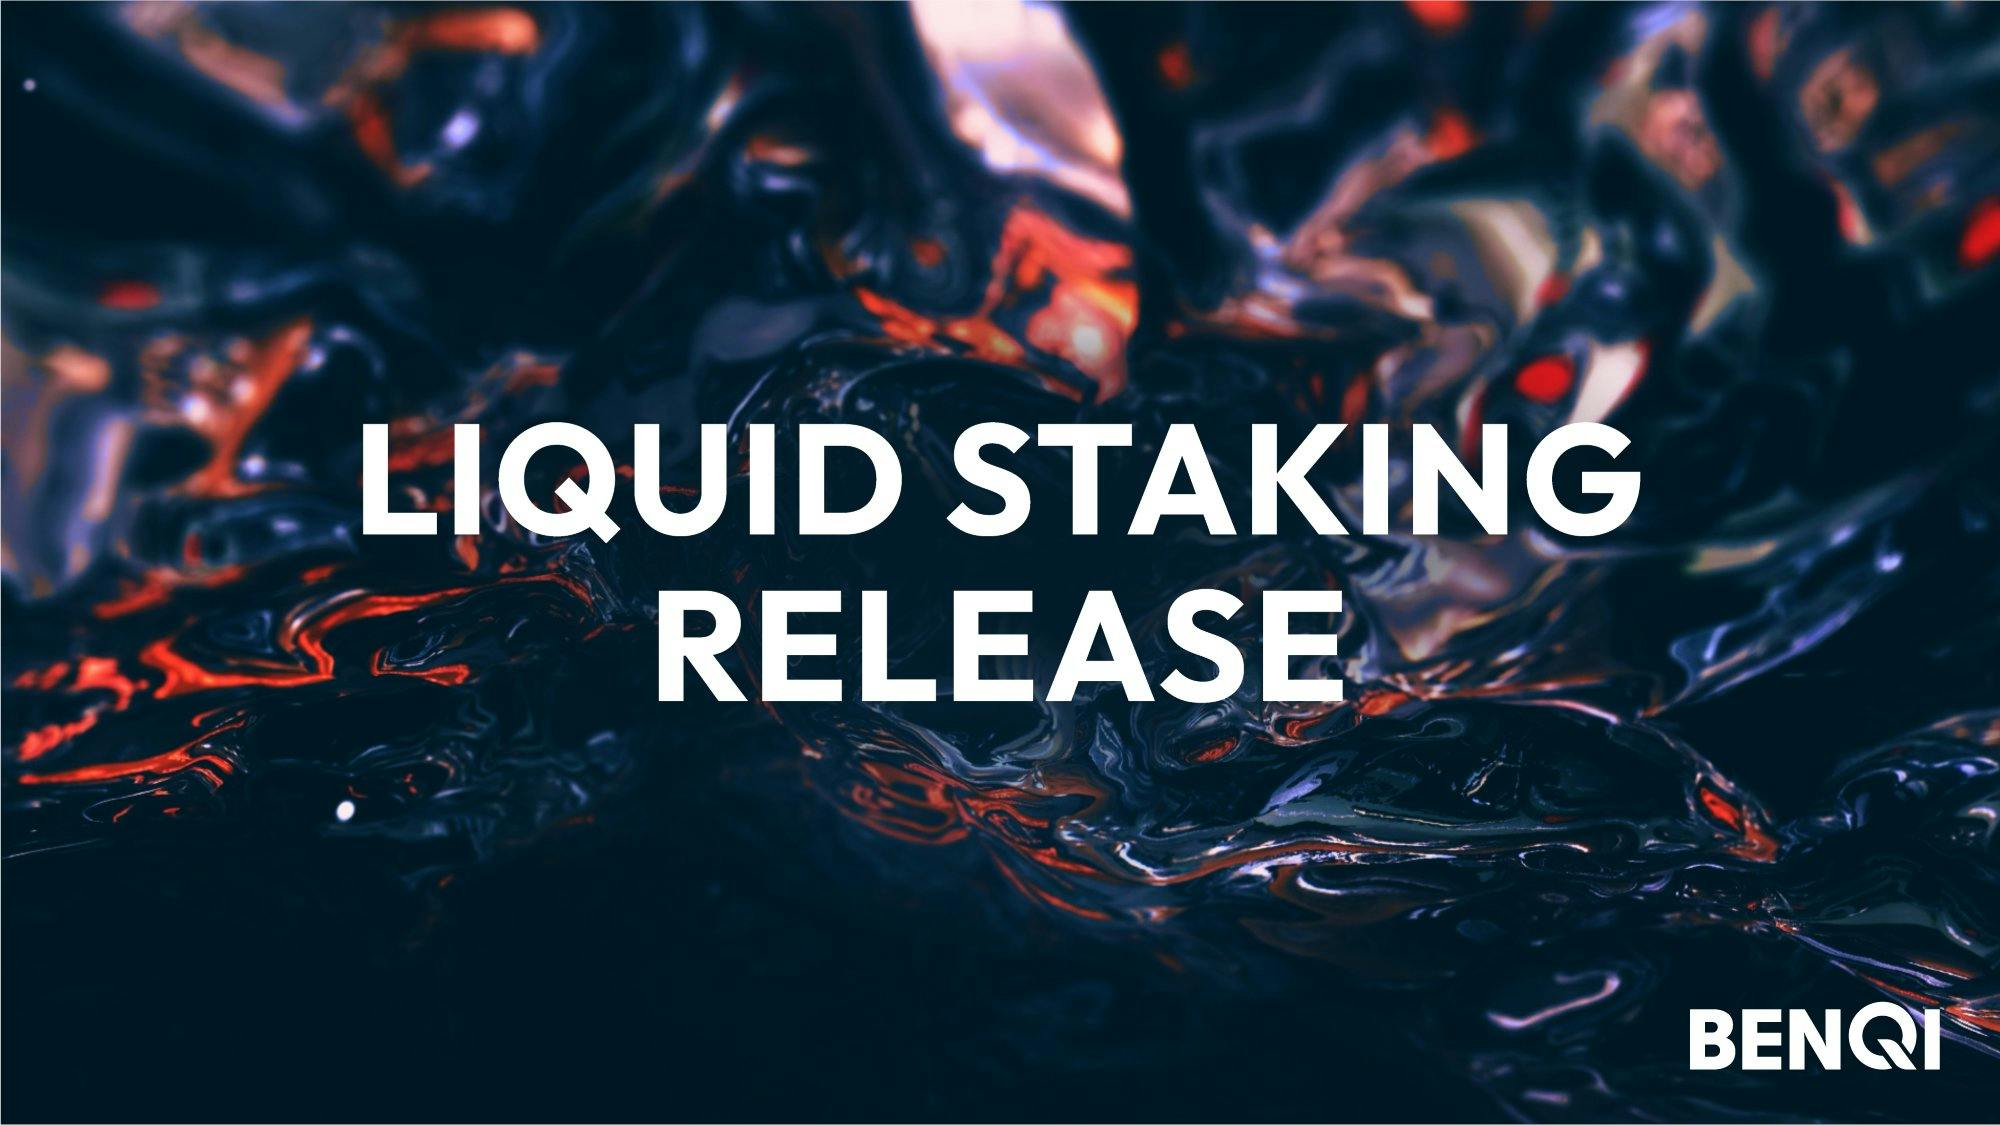 Benqi releases liquid staking on Avalanche